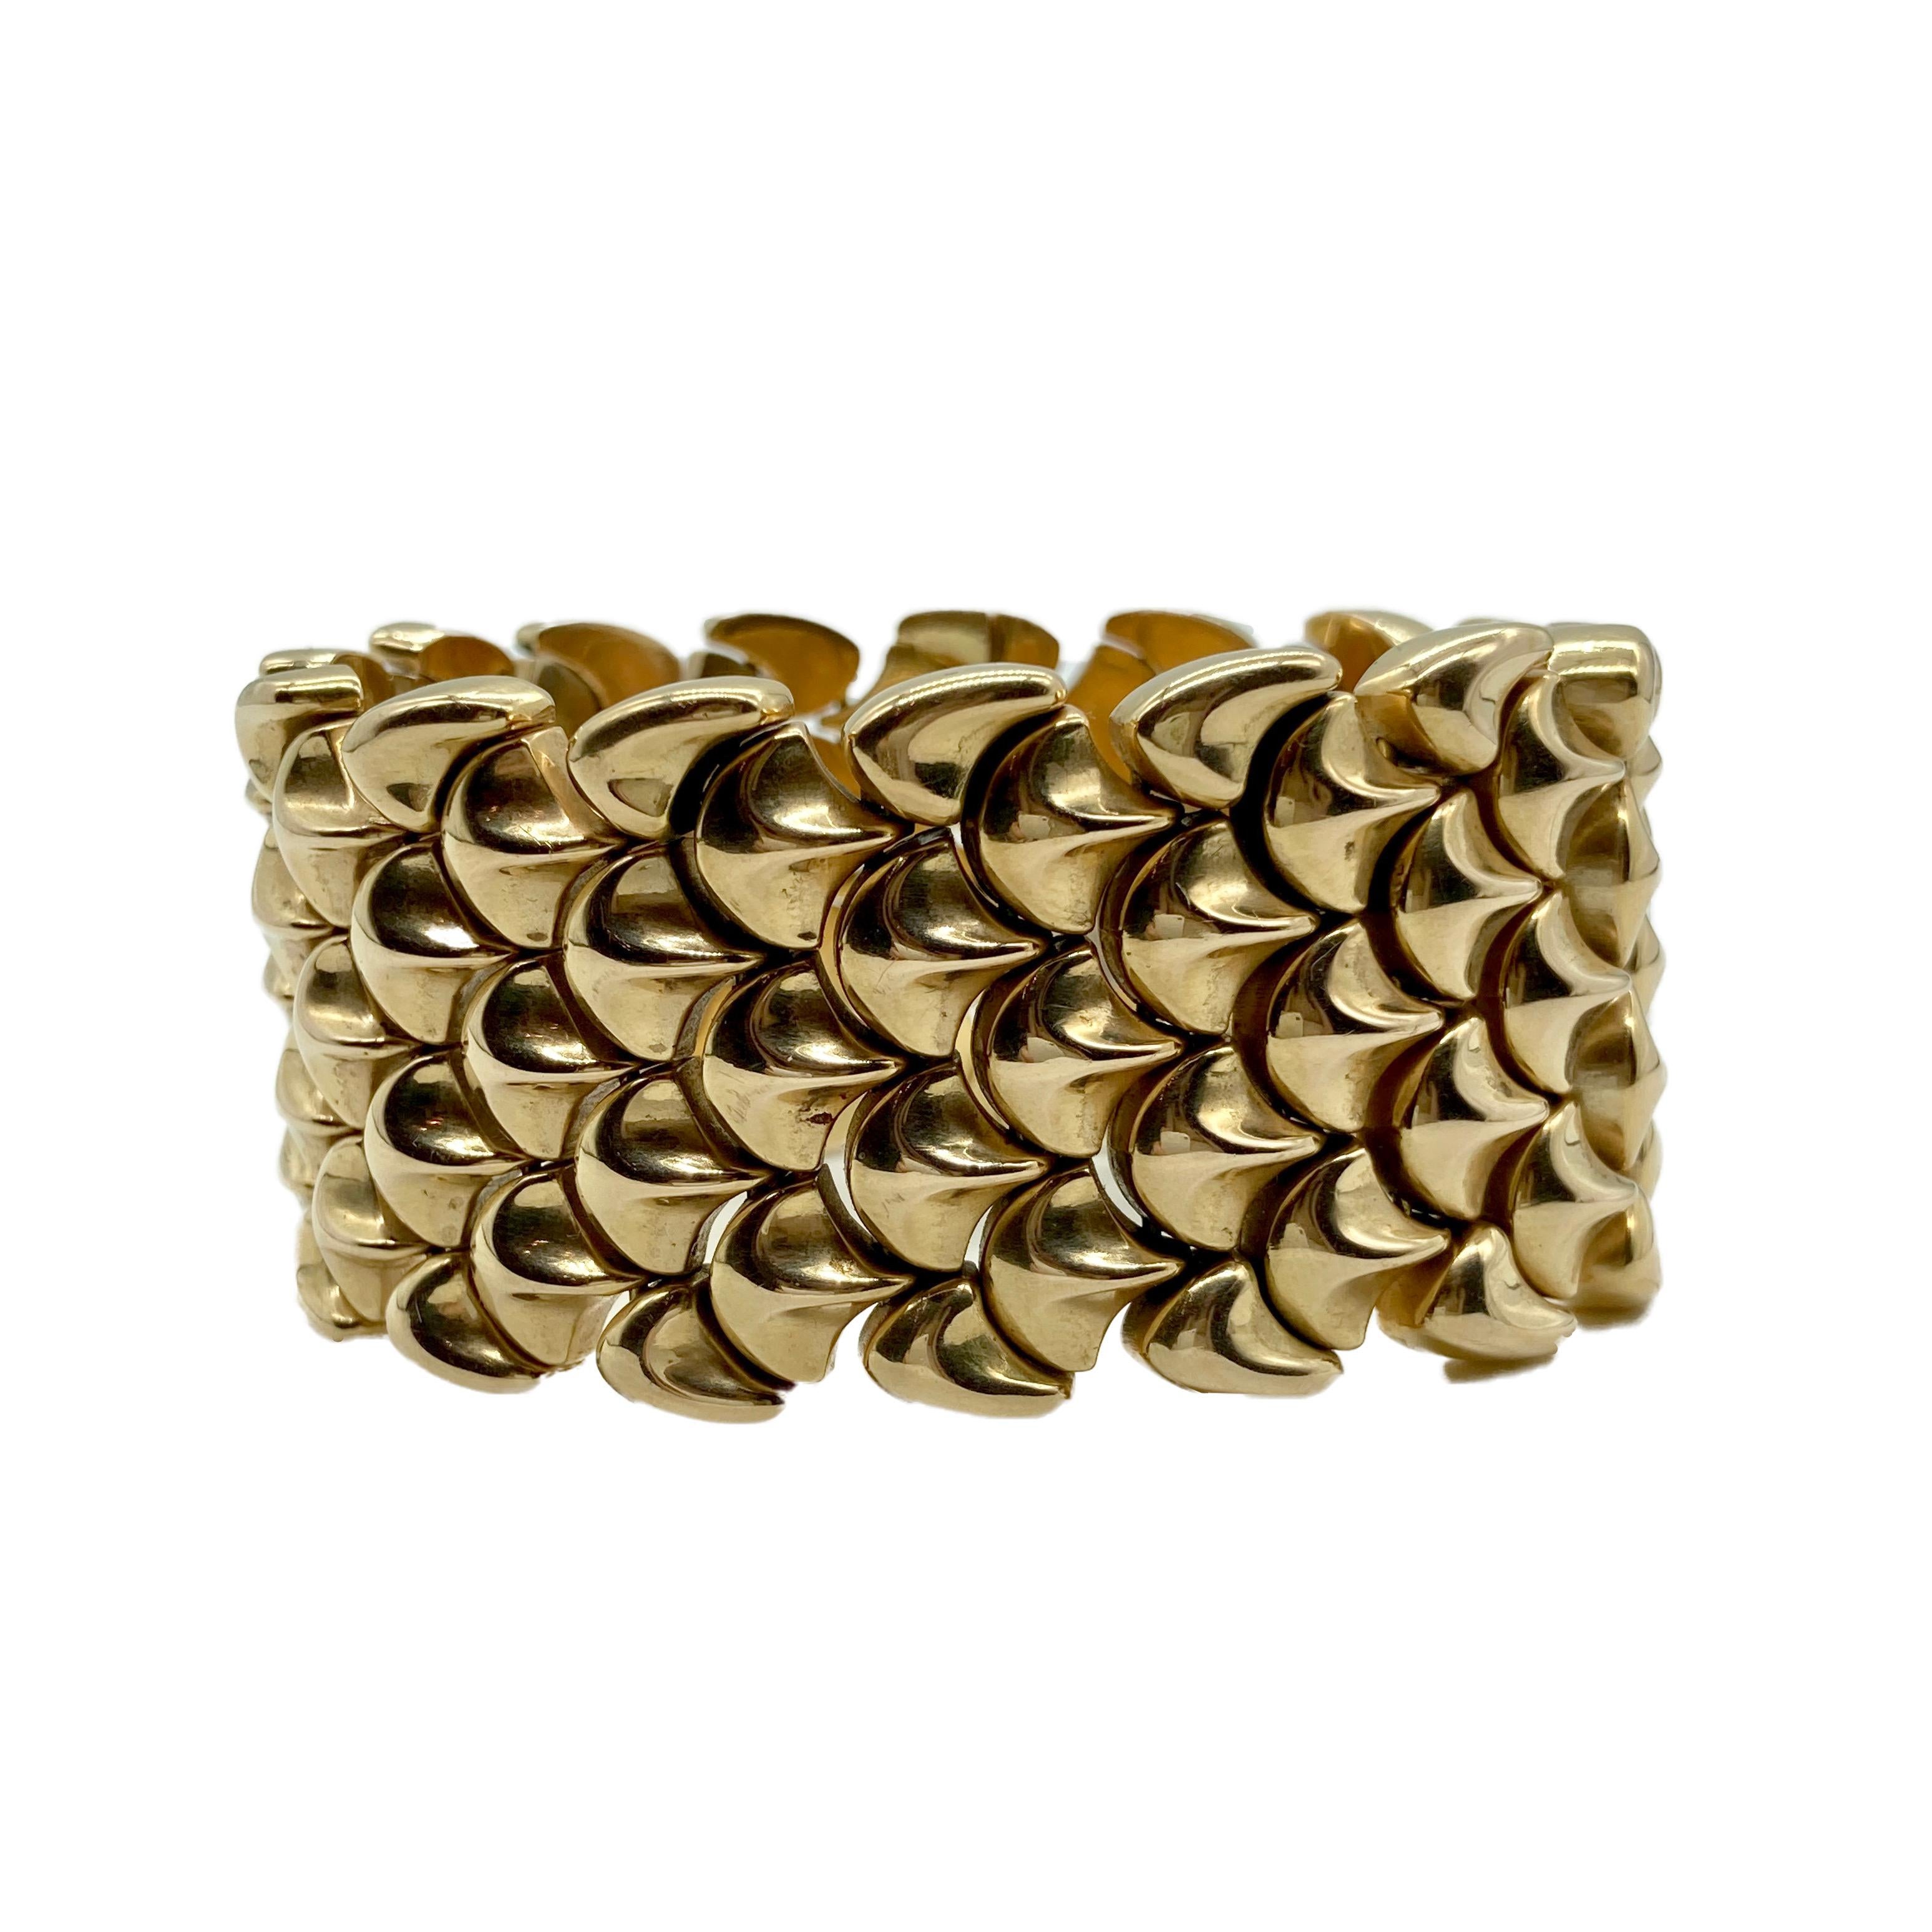 A retro yellow gold bracelet of scallop design dating from the 1940s. Made in Italy.